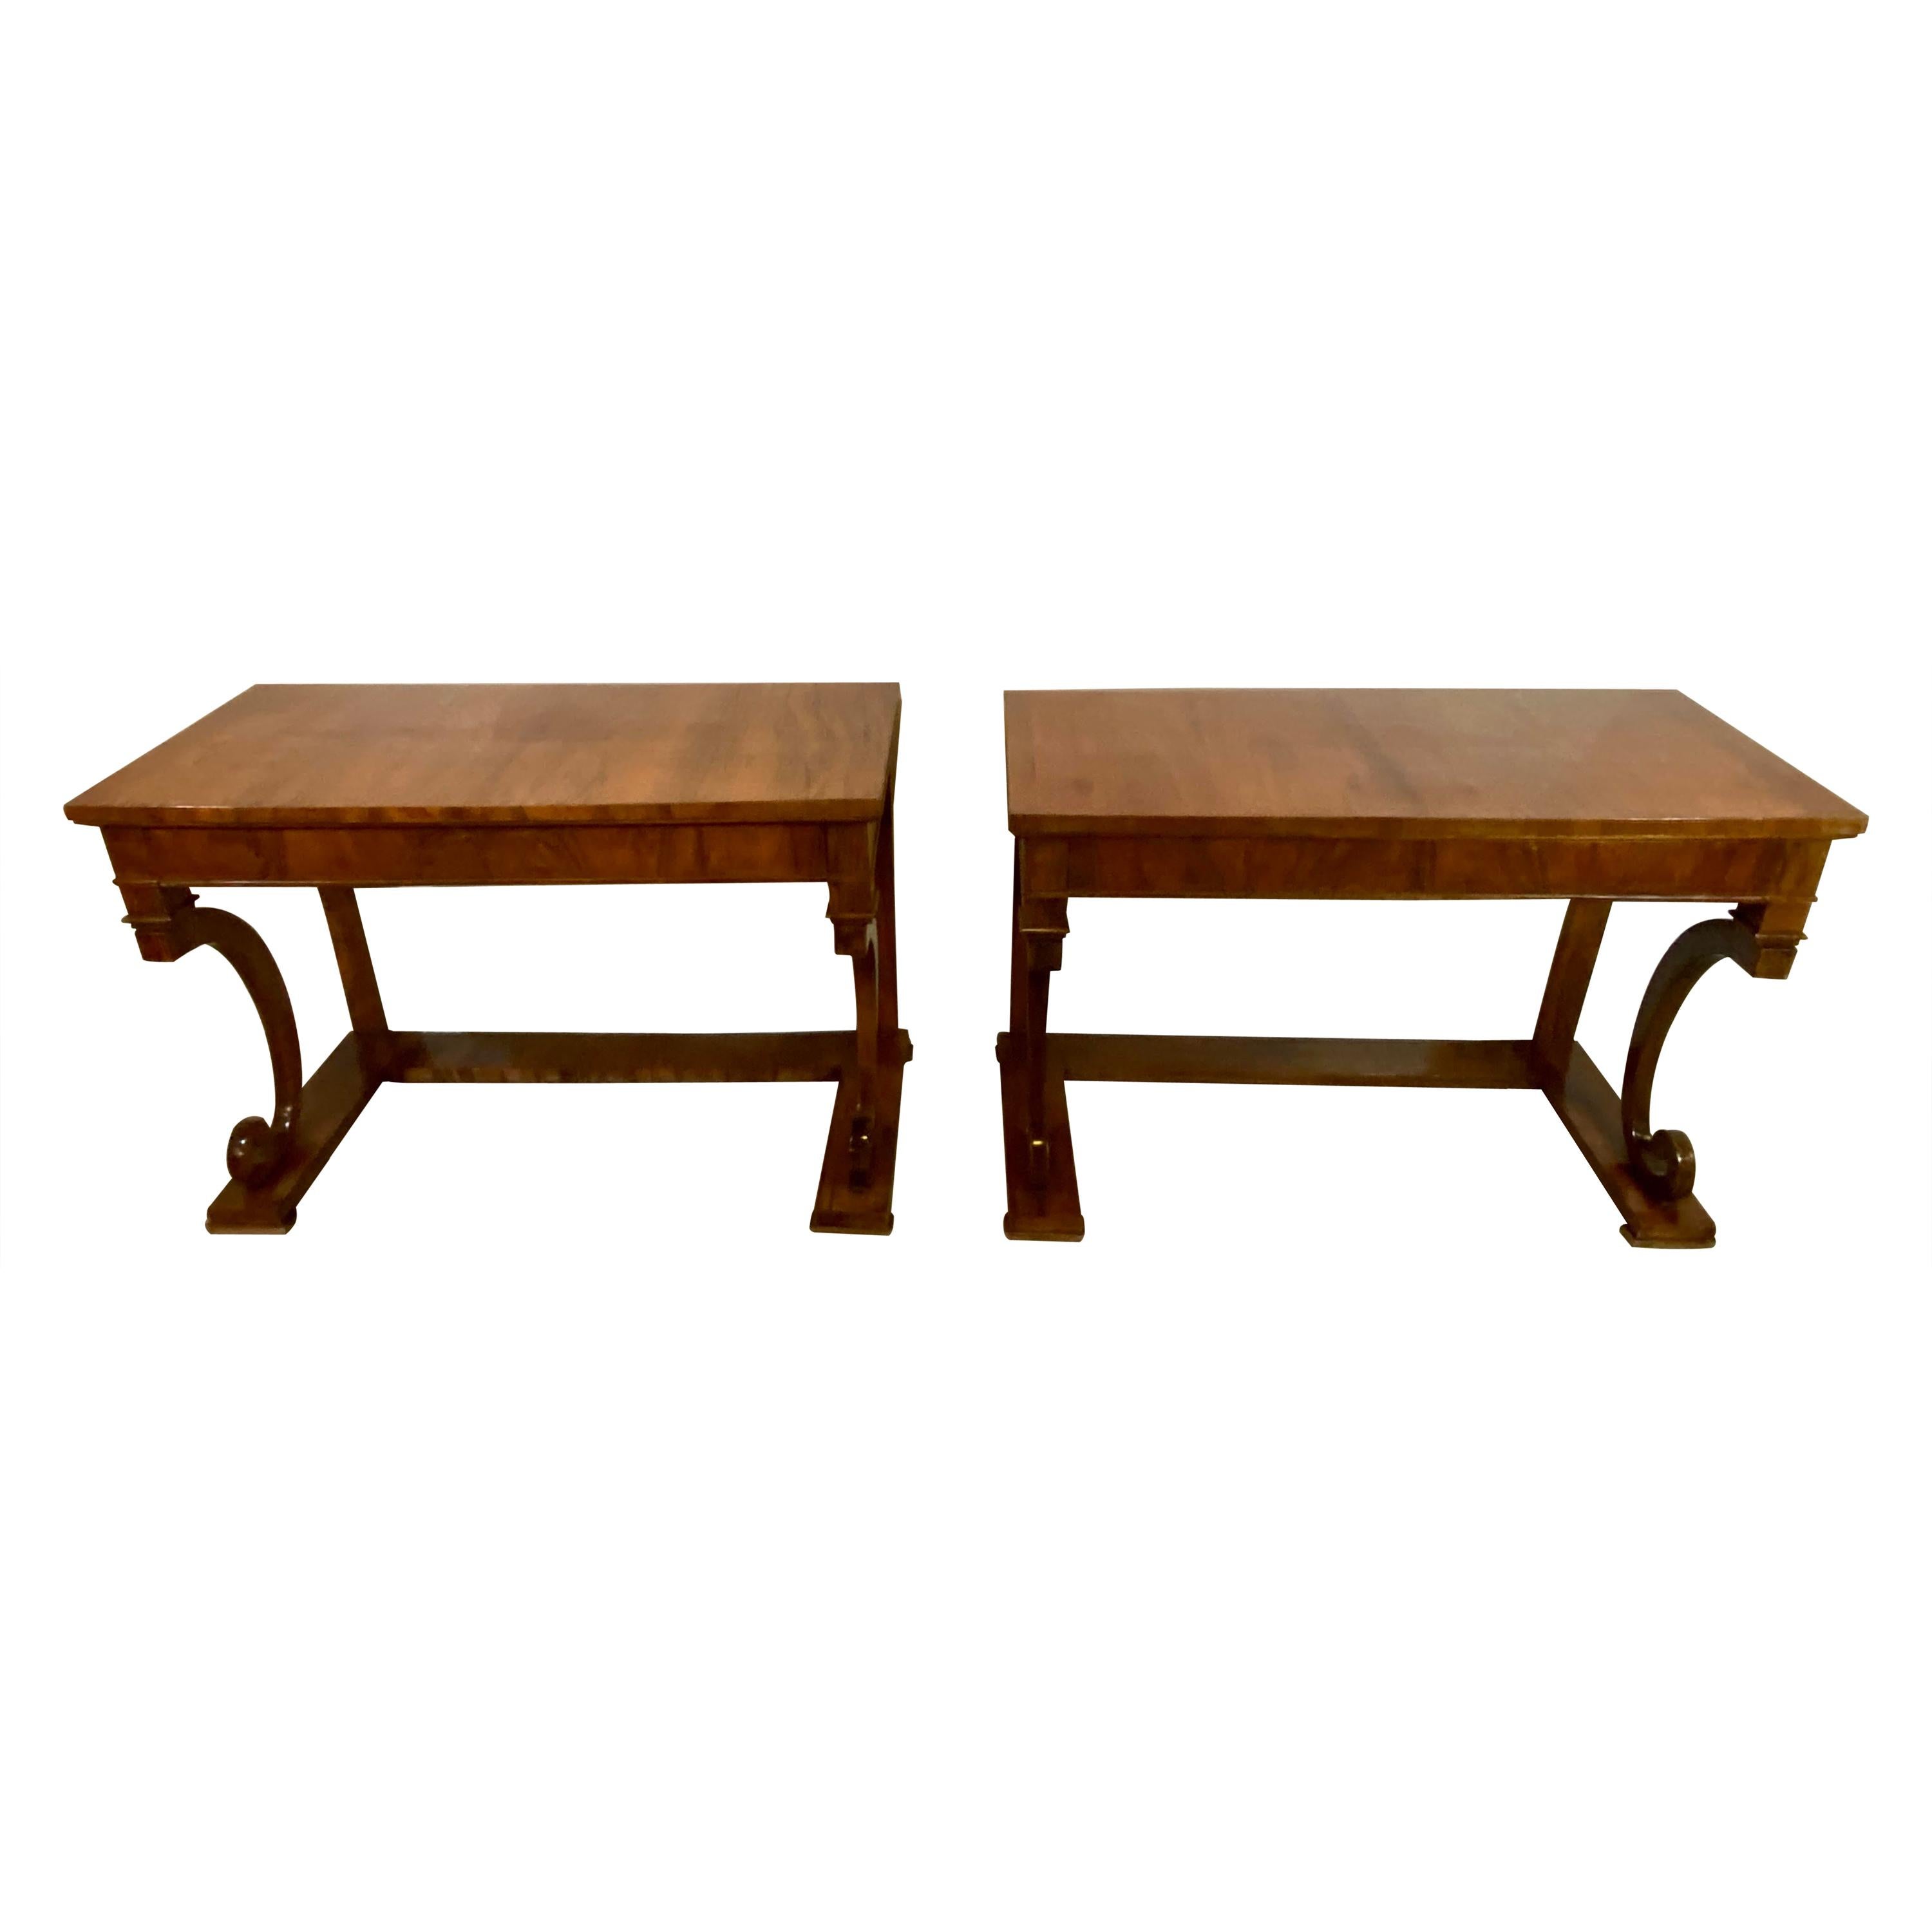 Pair of Empire Period Rosewood Consoles or Pier Tables